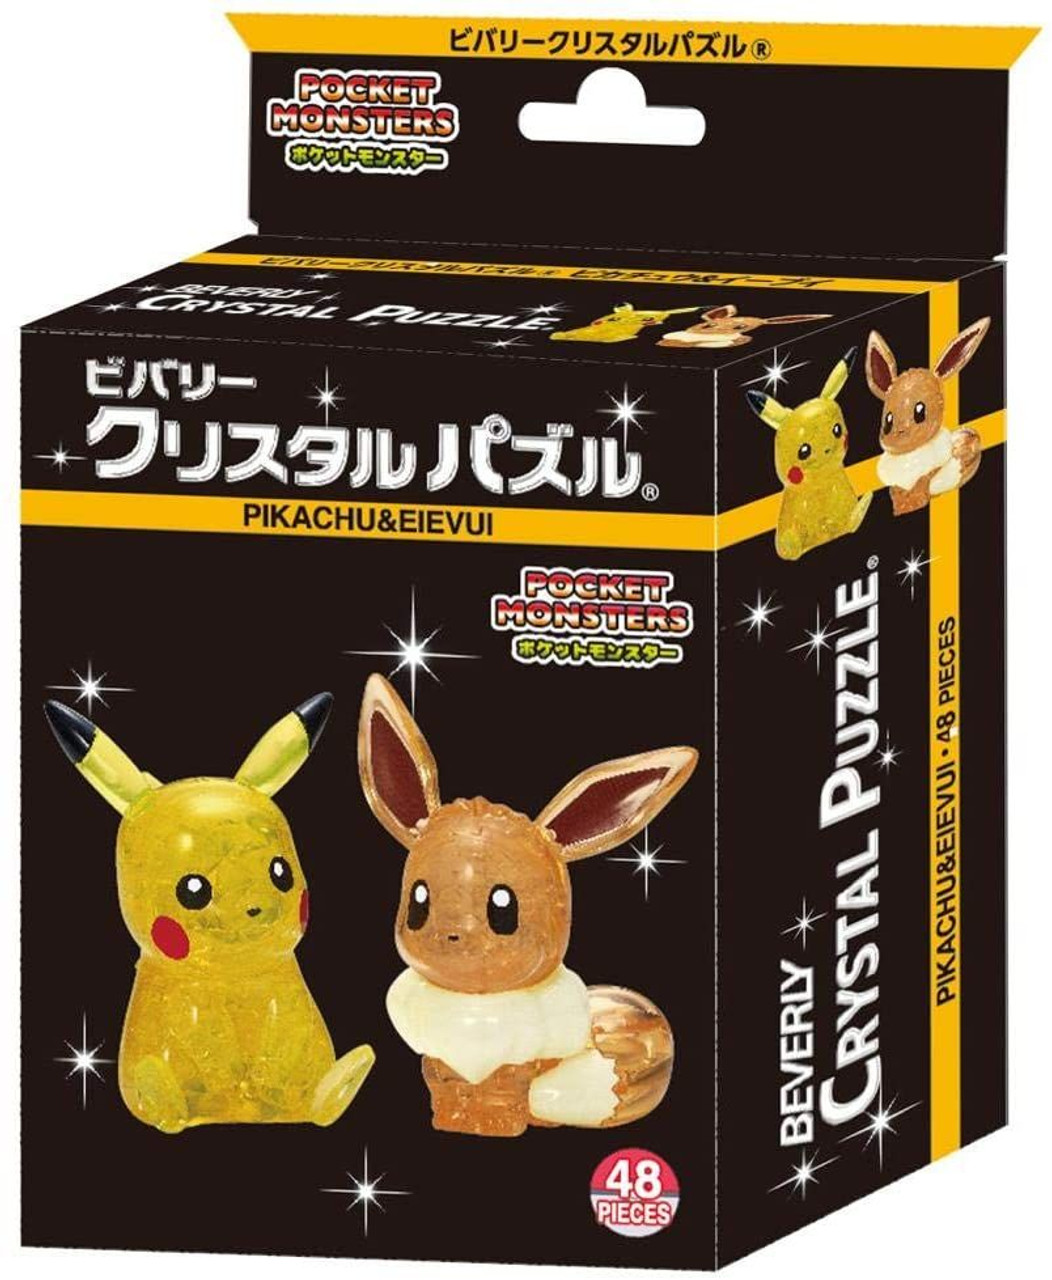 Beverly Beverly Pokemon Xy Crystal 3D Jigsaw Puzzle - Pikachu (29 Piece)  Puzzles